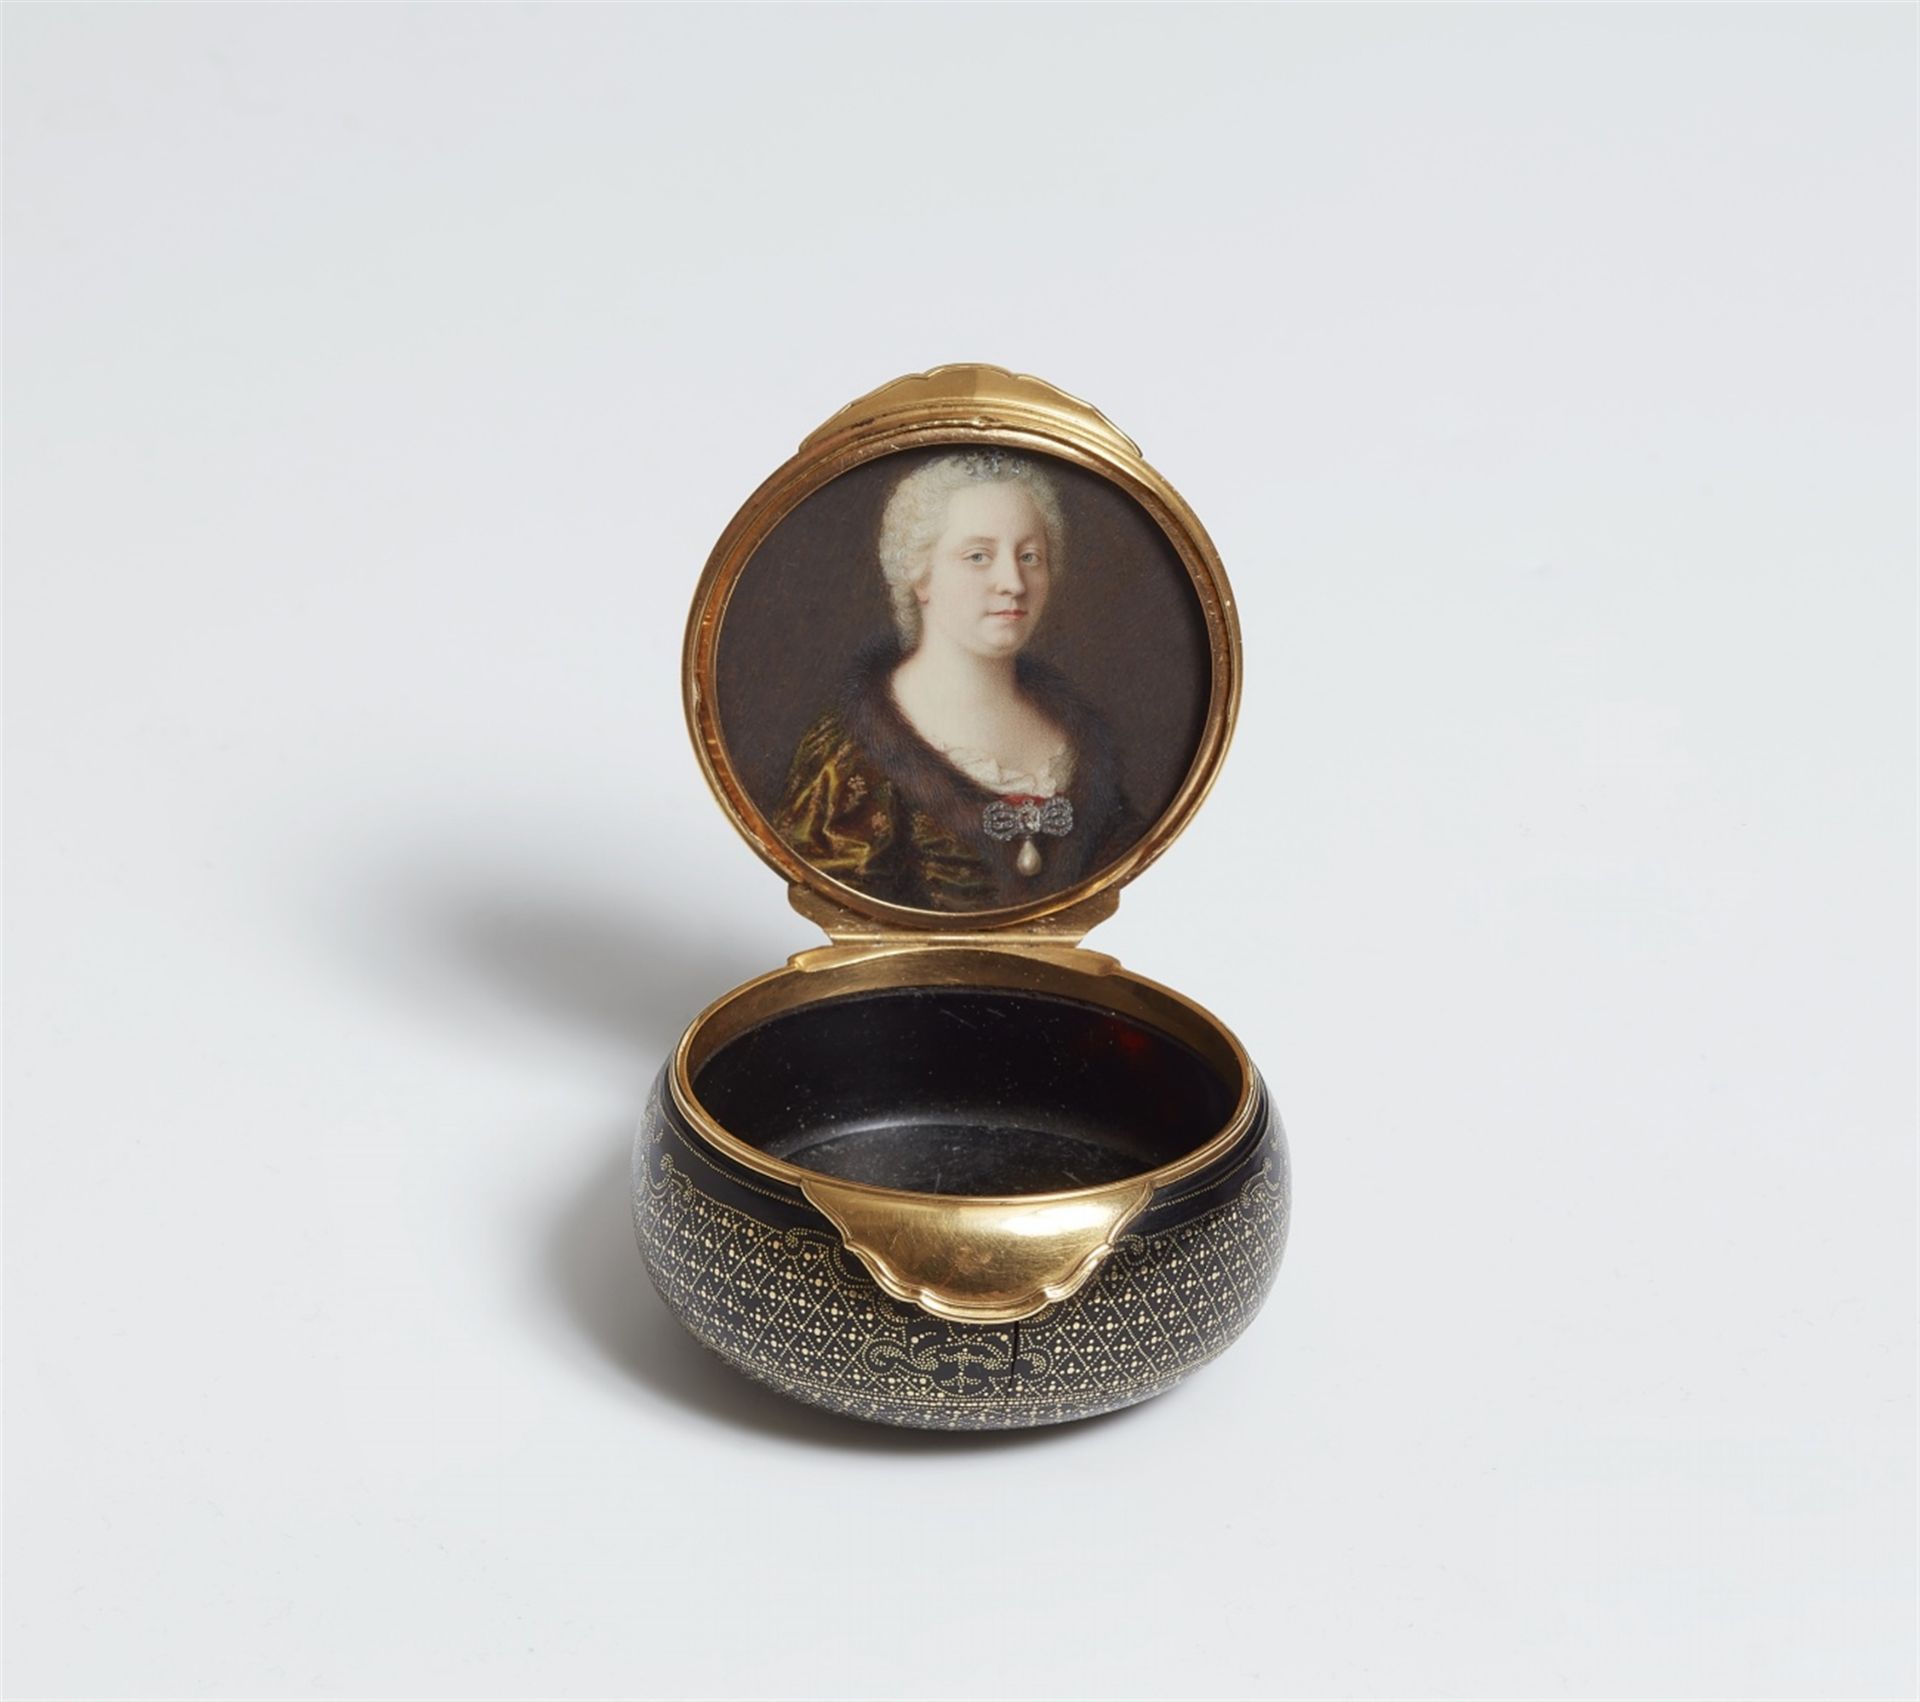 A tortoiseshell snuff box with a portrait of Empress Maria Theresia